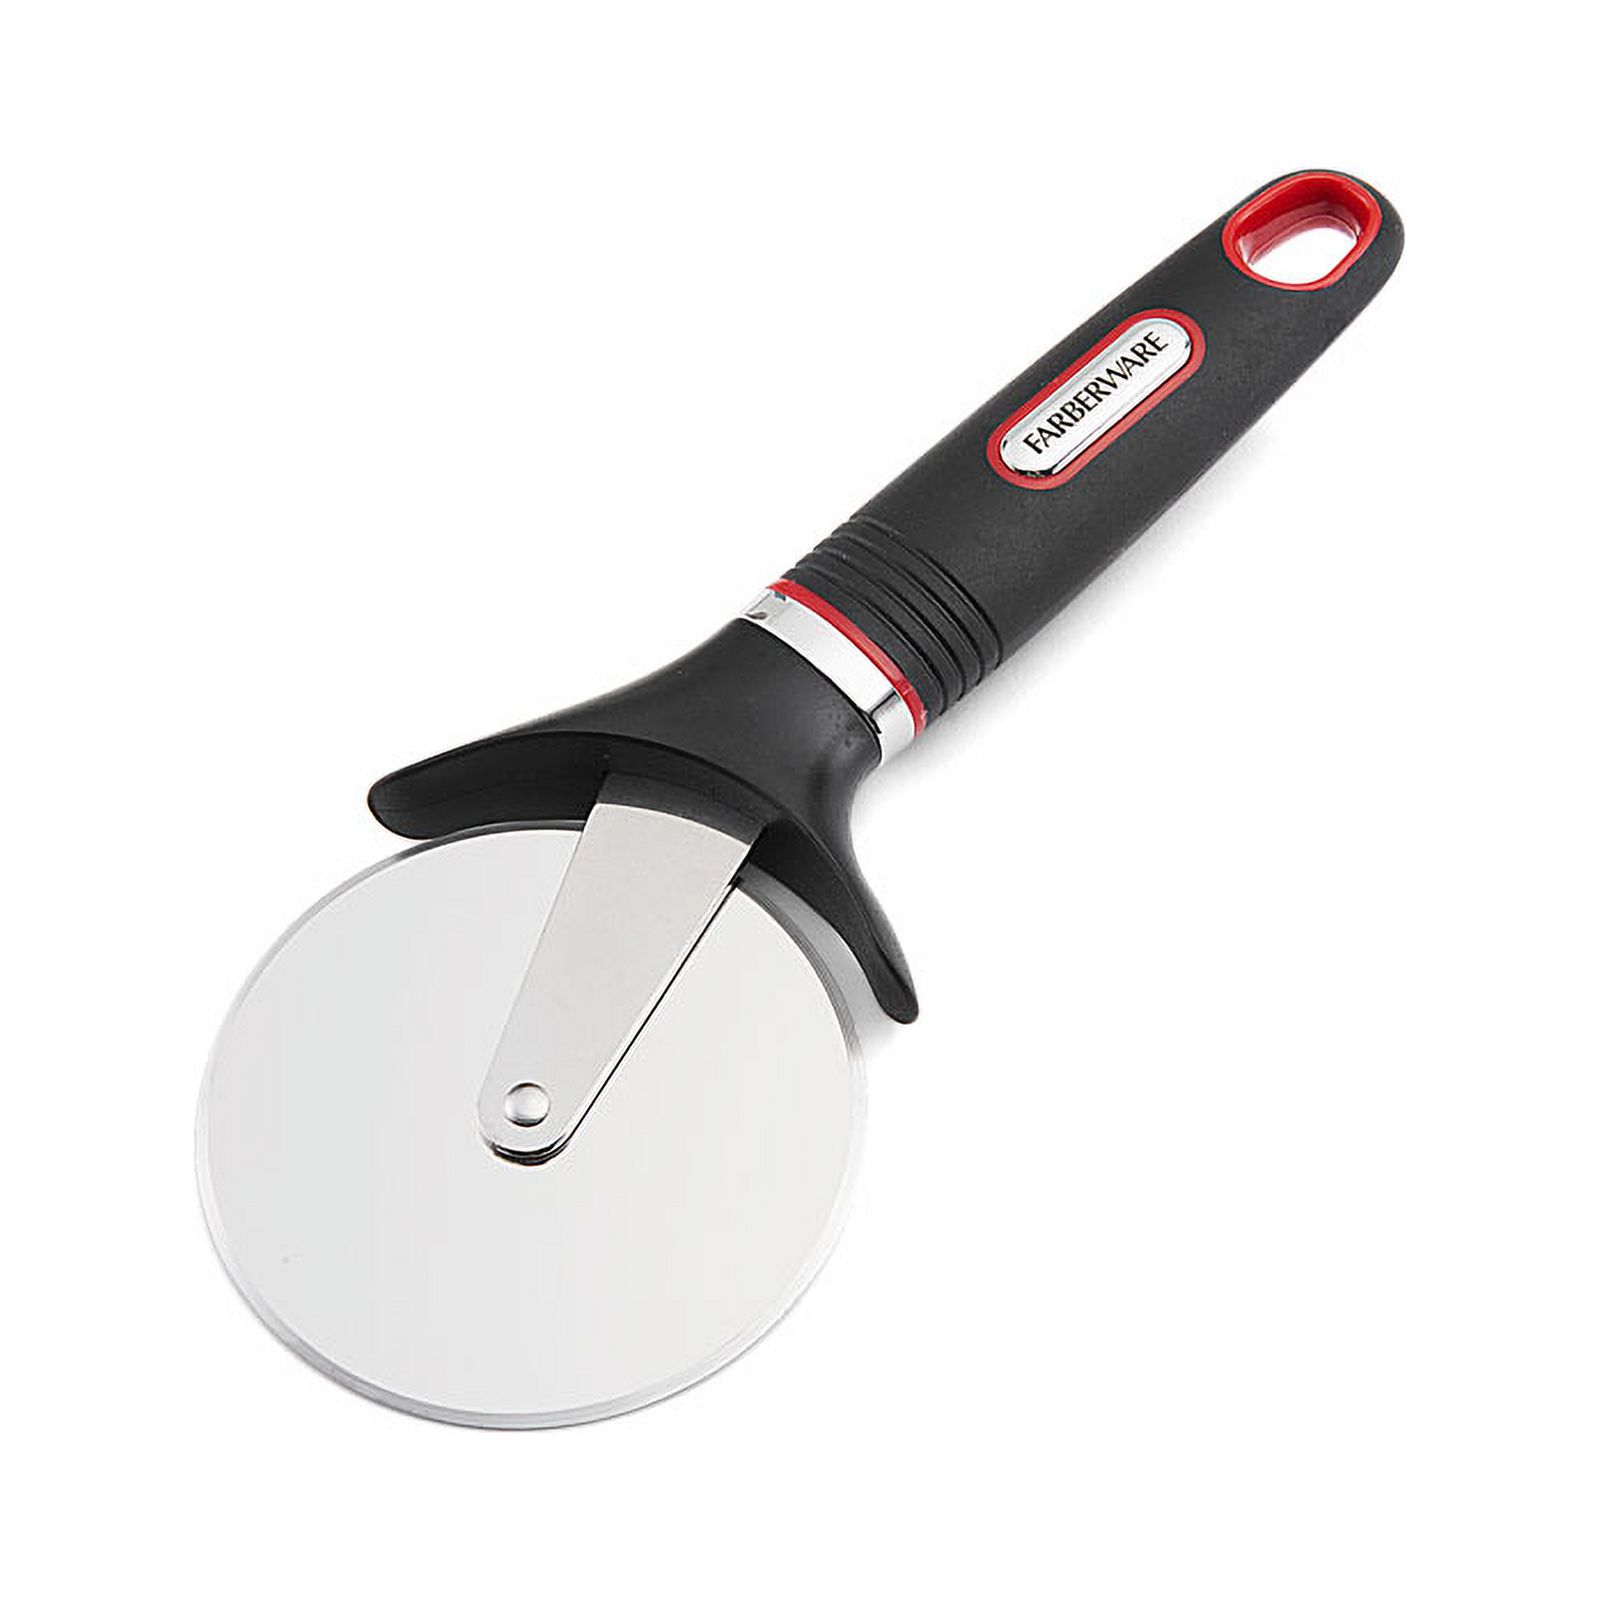 Farberware Soft Grips Pizza Cutter with Red and Black Handle - image 3 of 8